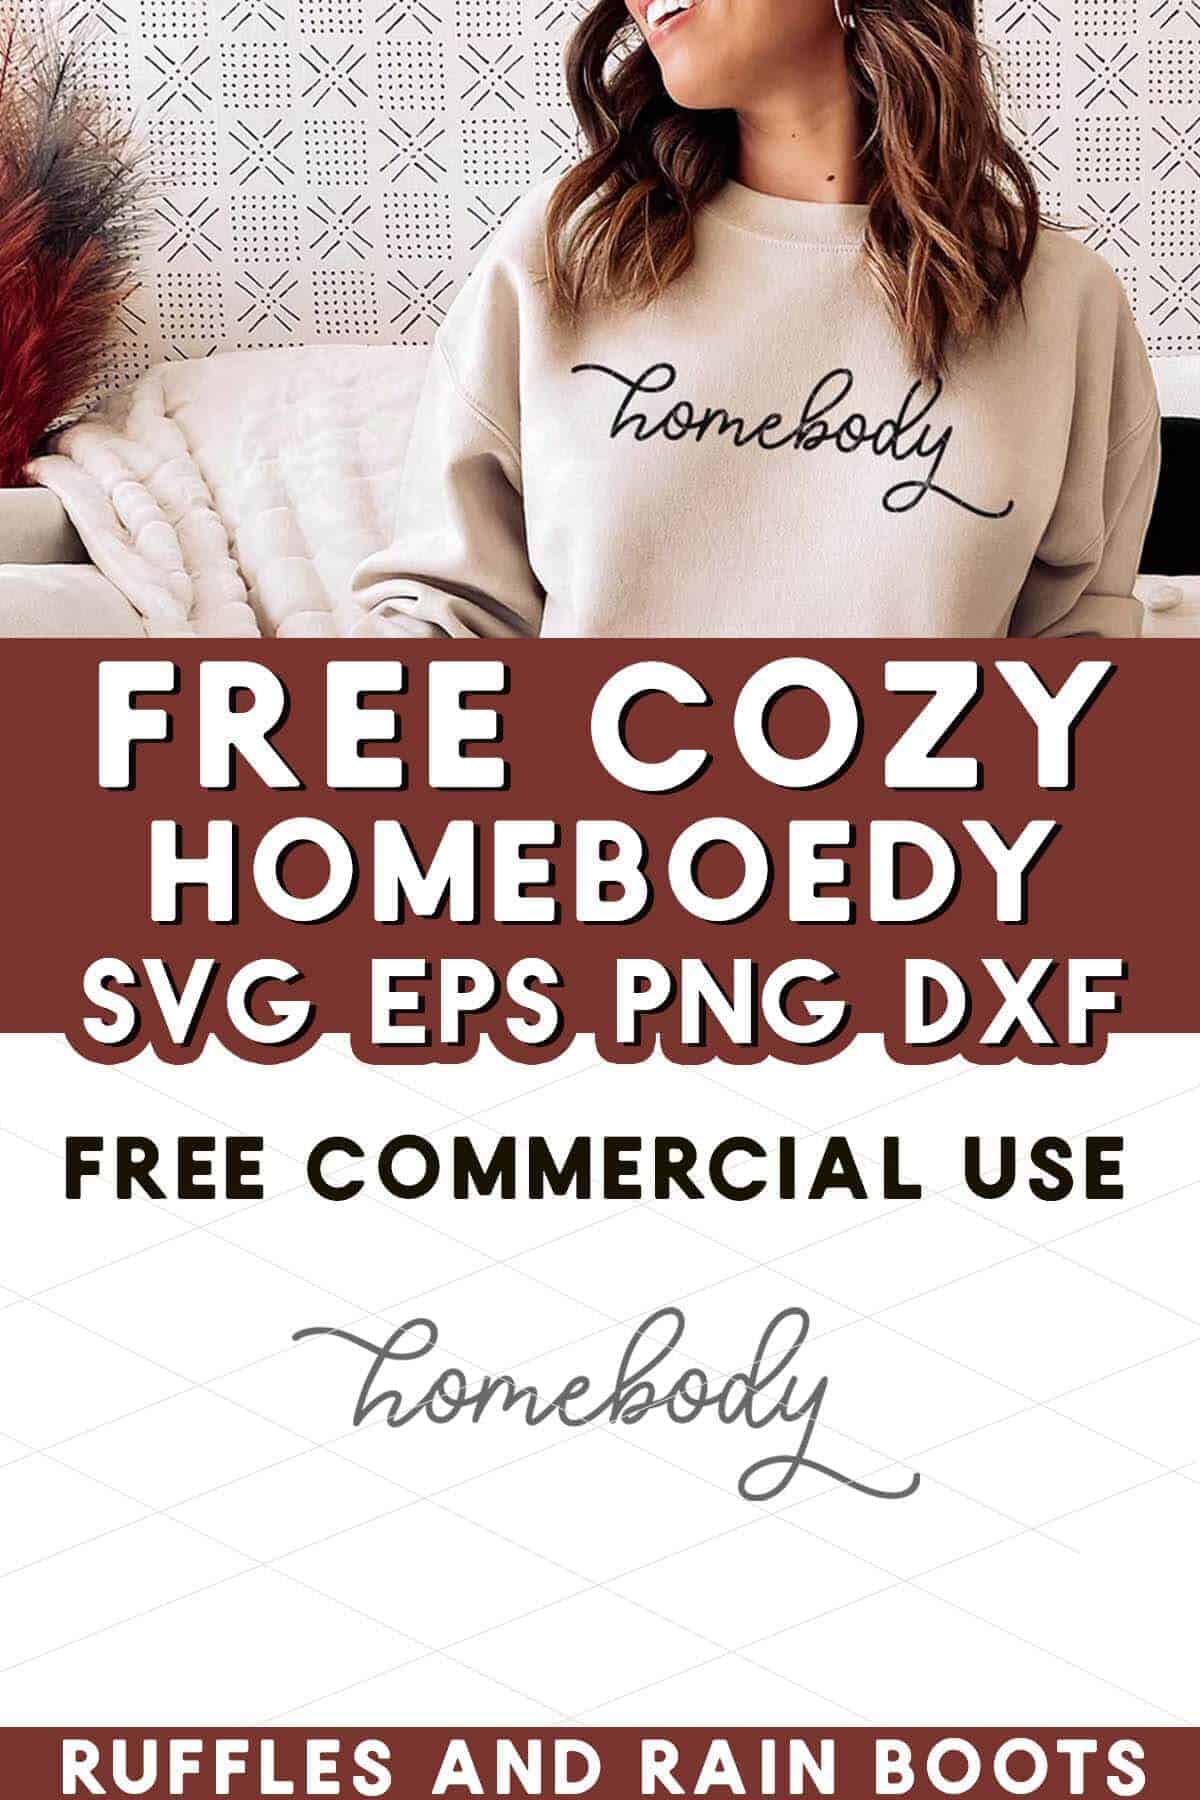 Vertical stacked collage of woman in sweatshirt homebody cut file with text which reads free cozy homebody SVG.